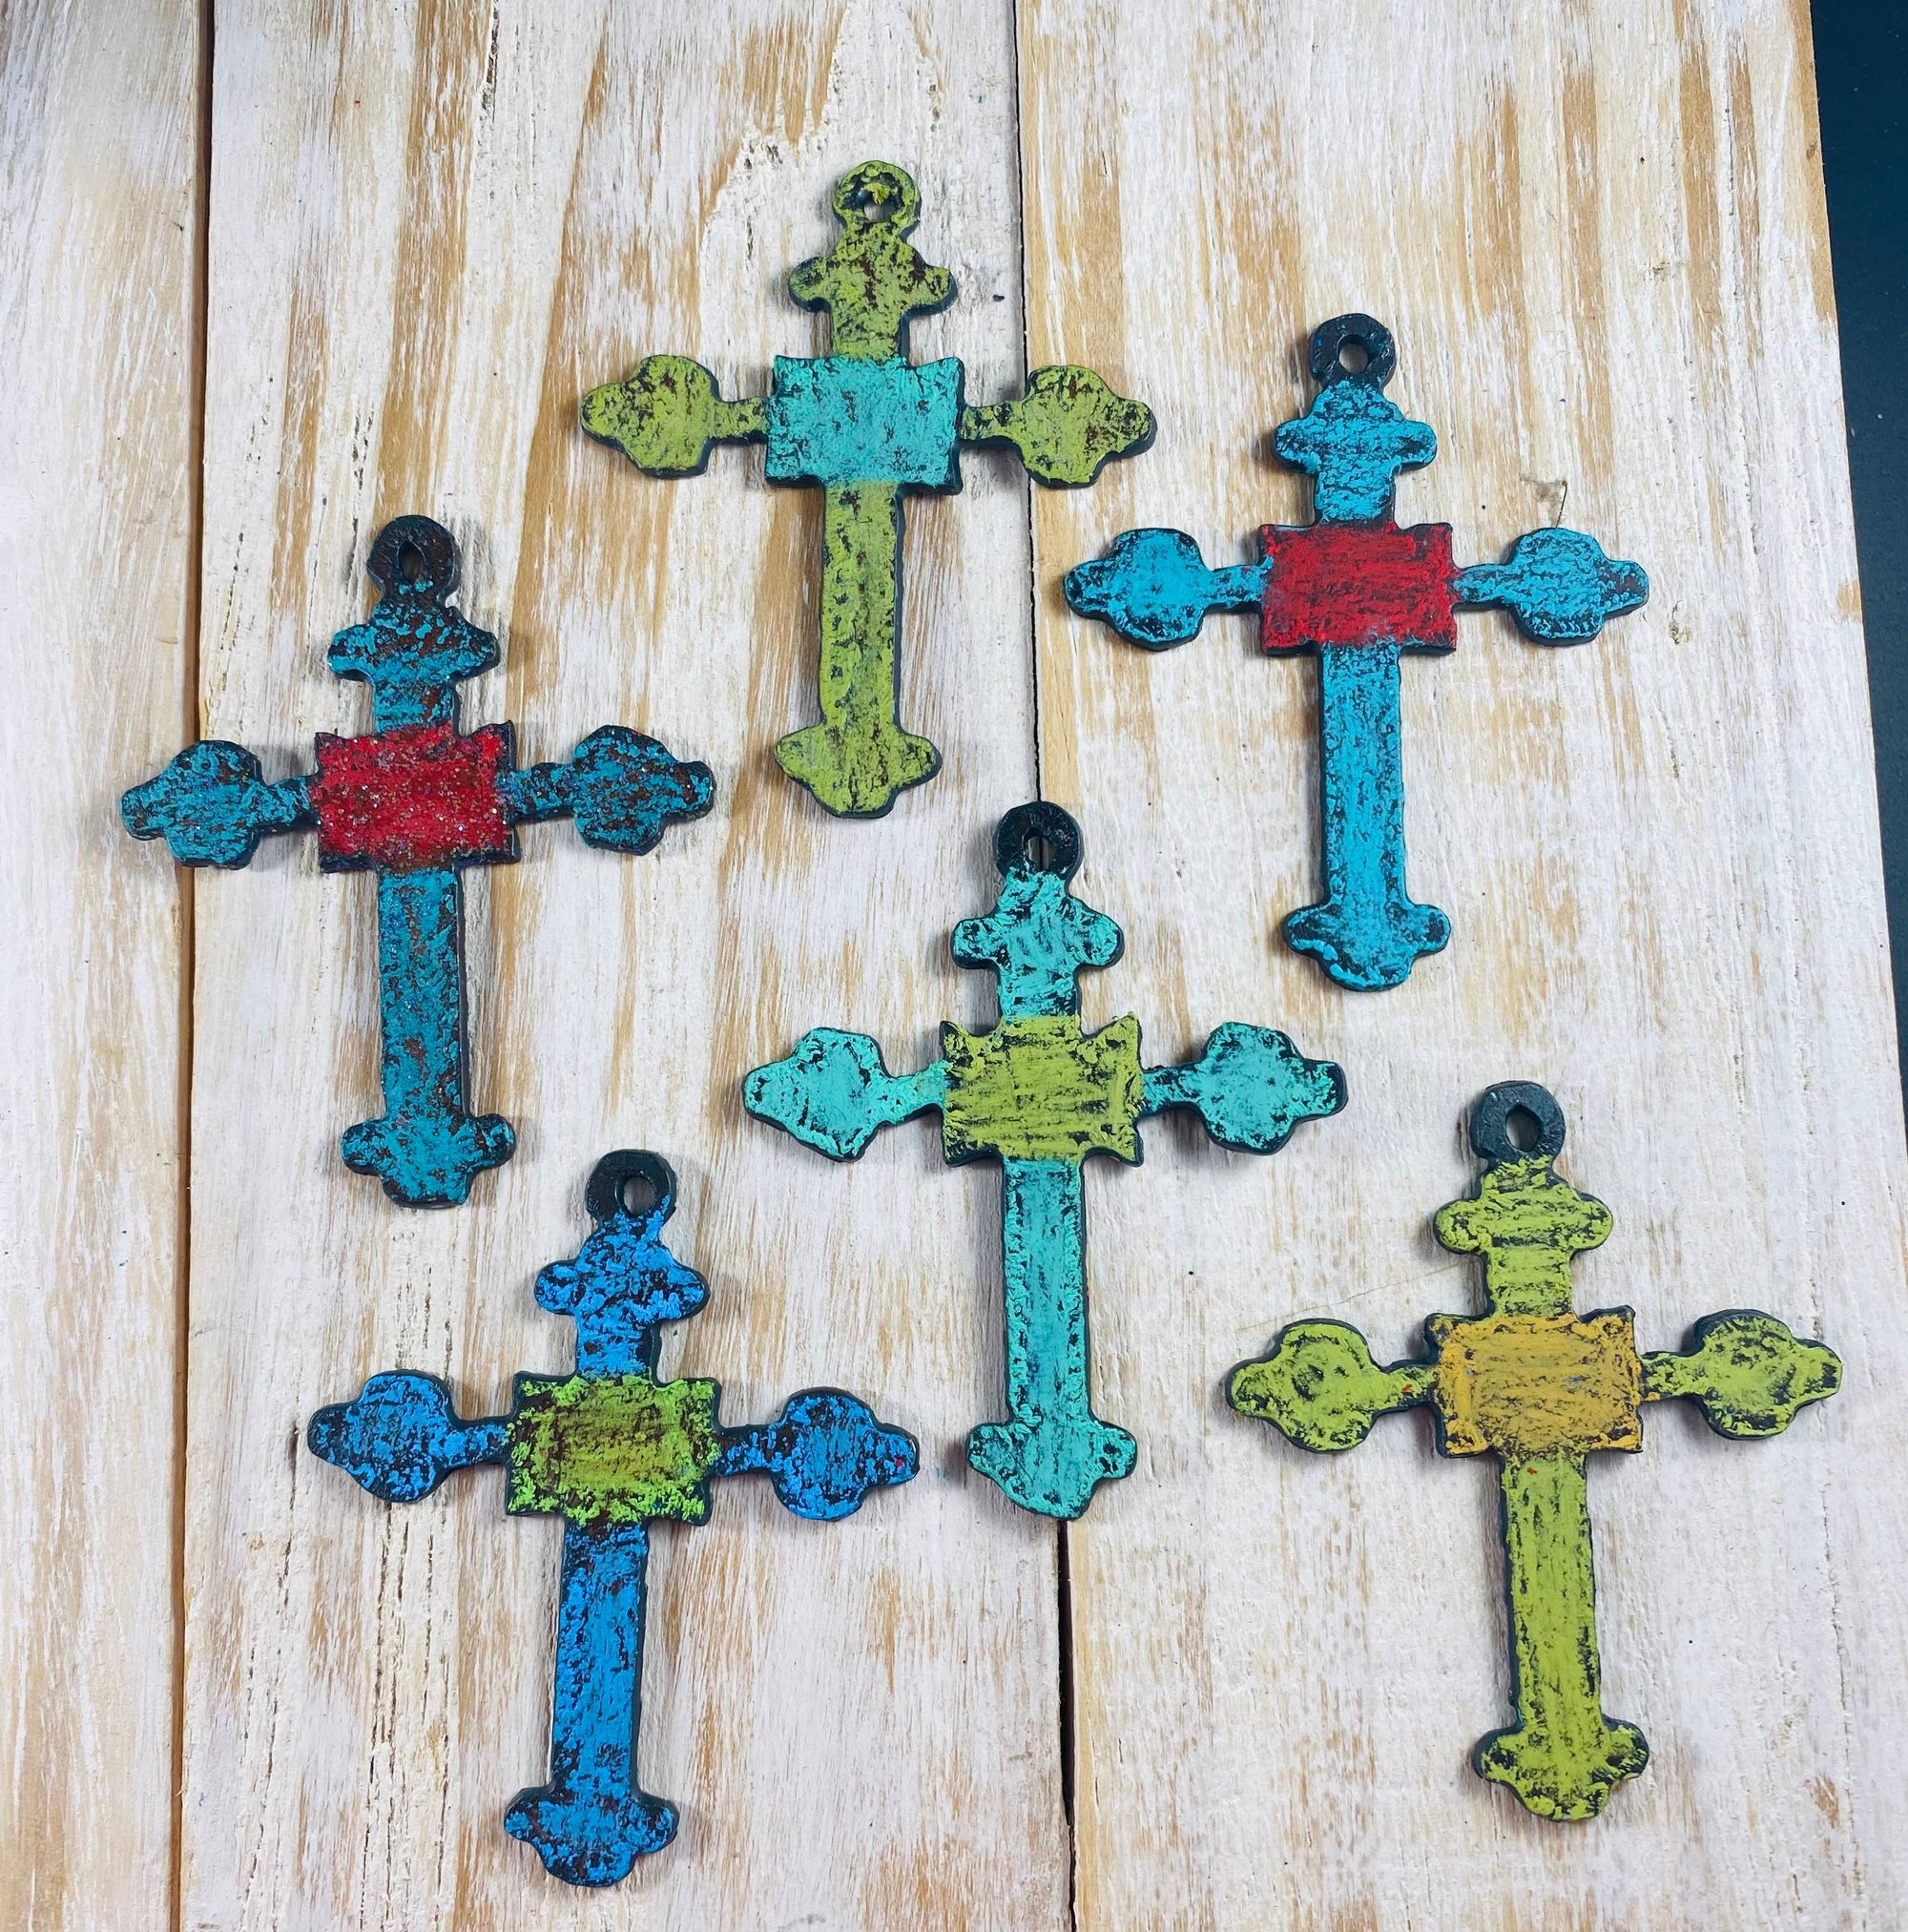 White-washed wood table holds six metal stylized rustic crosses painted in bright color combinations including turquoise and red, lime and turquoise, light turquoise and red, light teal and lime, blue and lime, lime and yellow. 